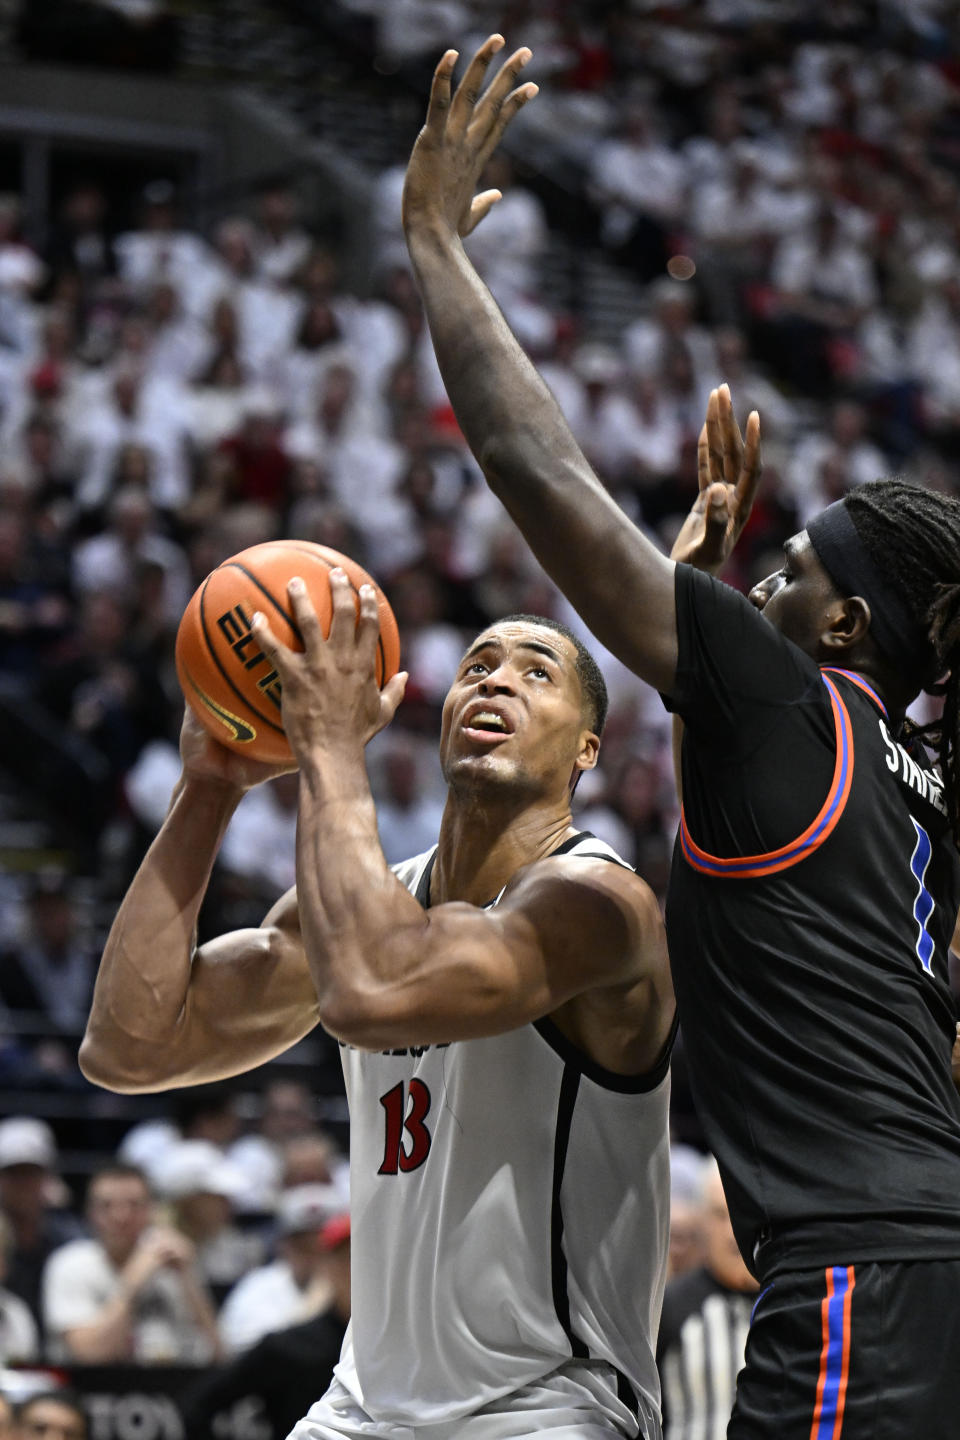 San Diego State forward Jaedon LeDee (13) looks for a shot against Boise State forward O'Mar Stanley (1) during the second half of an NCAA college basketball game Friday, March 8, 2024, in San Diego. (AP Photo/Denis Poroy)